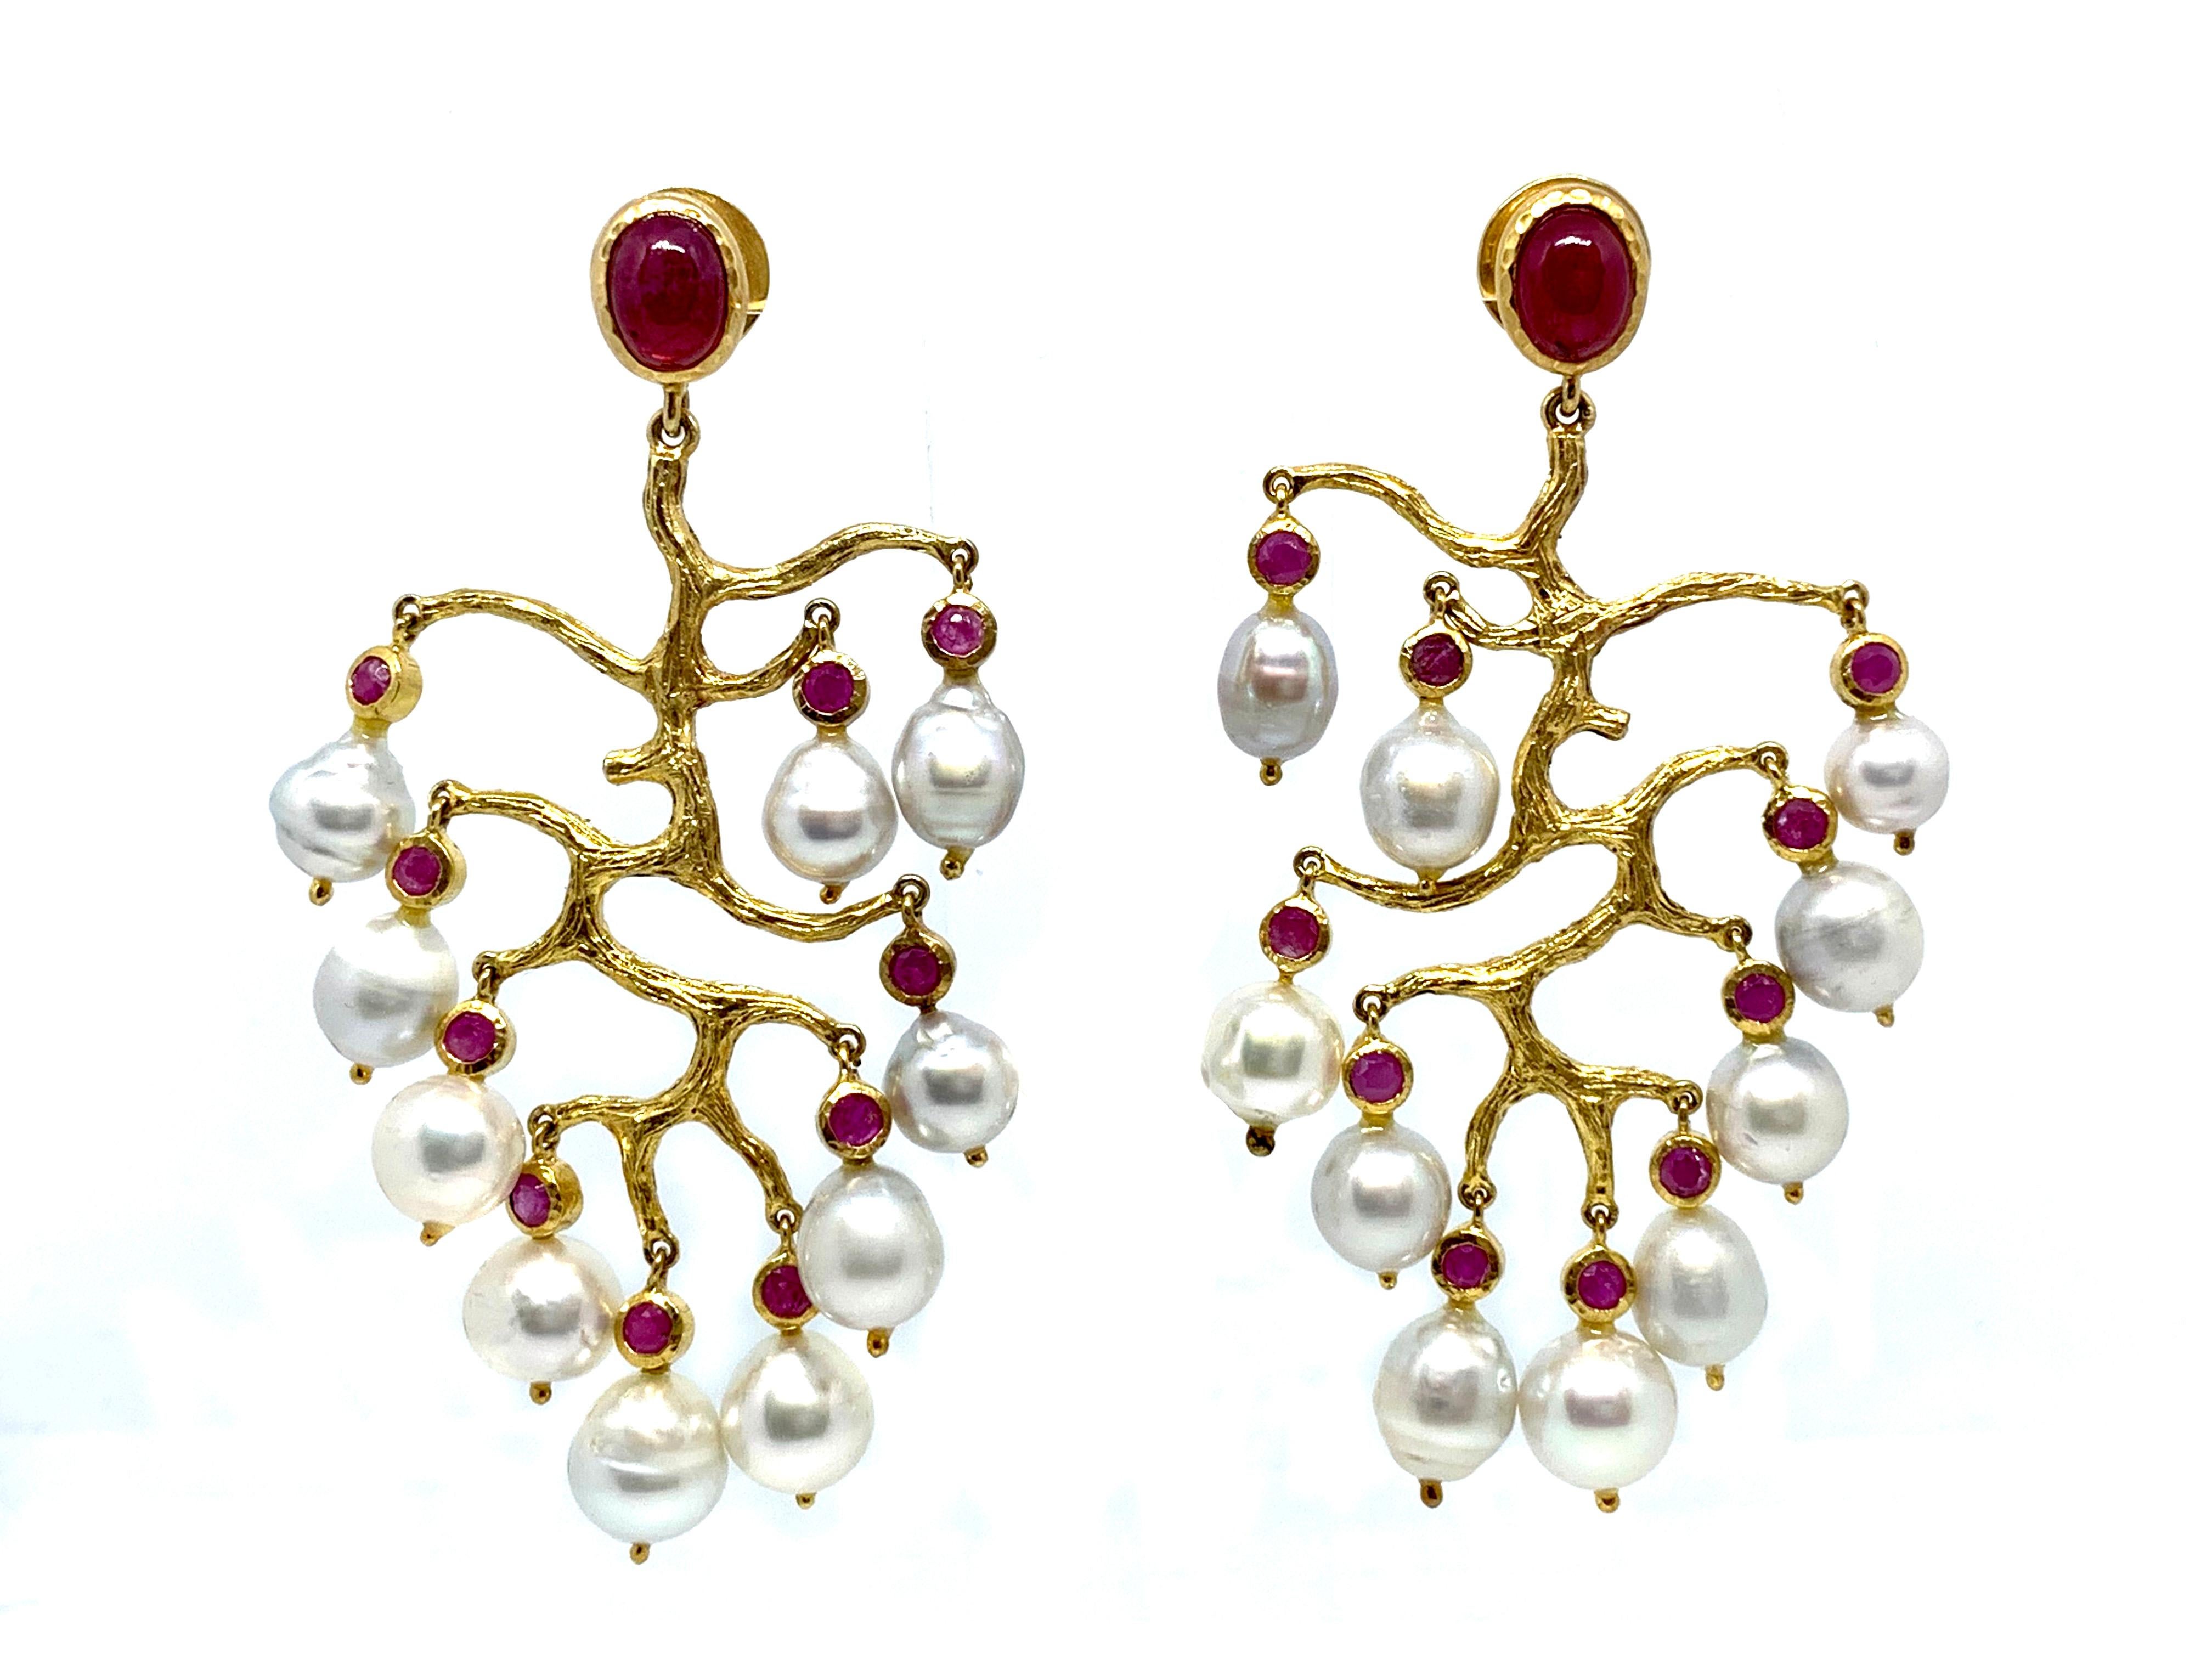 Runway Genuine Ruby and Australian South Sea Pearl Branch Chandelier Earrings

These gorgeous pair of earrings feature 20 pieces of high luster Australian south sea pearls and faceted round genuine rubies on the sterling branch,  genuine